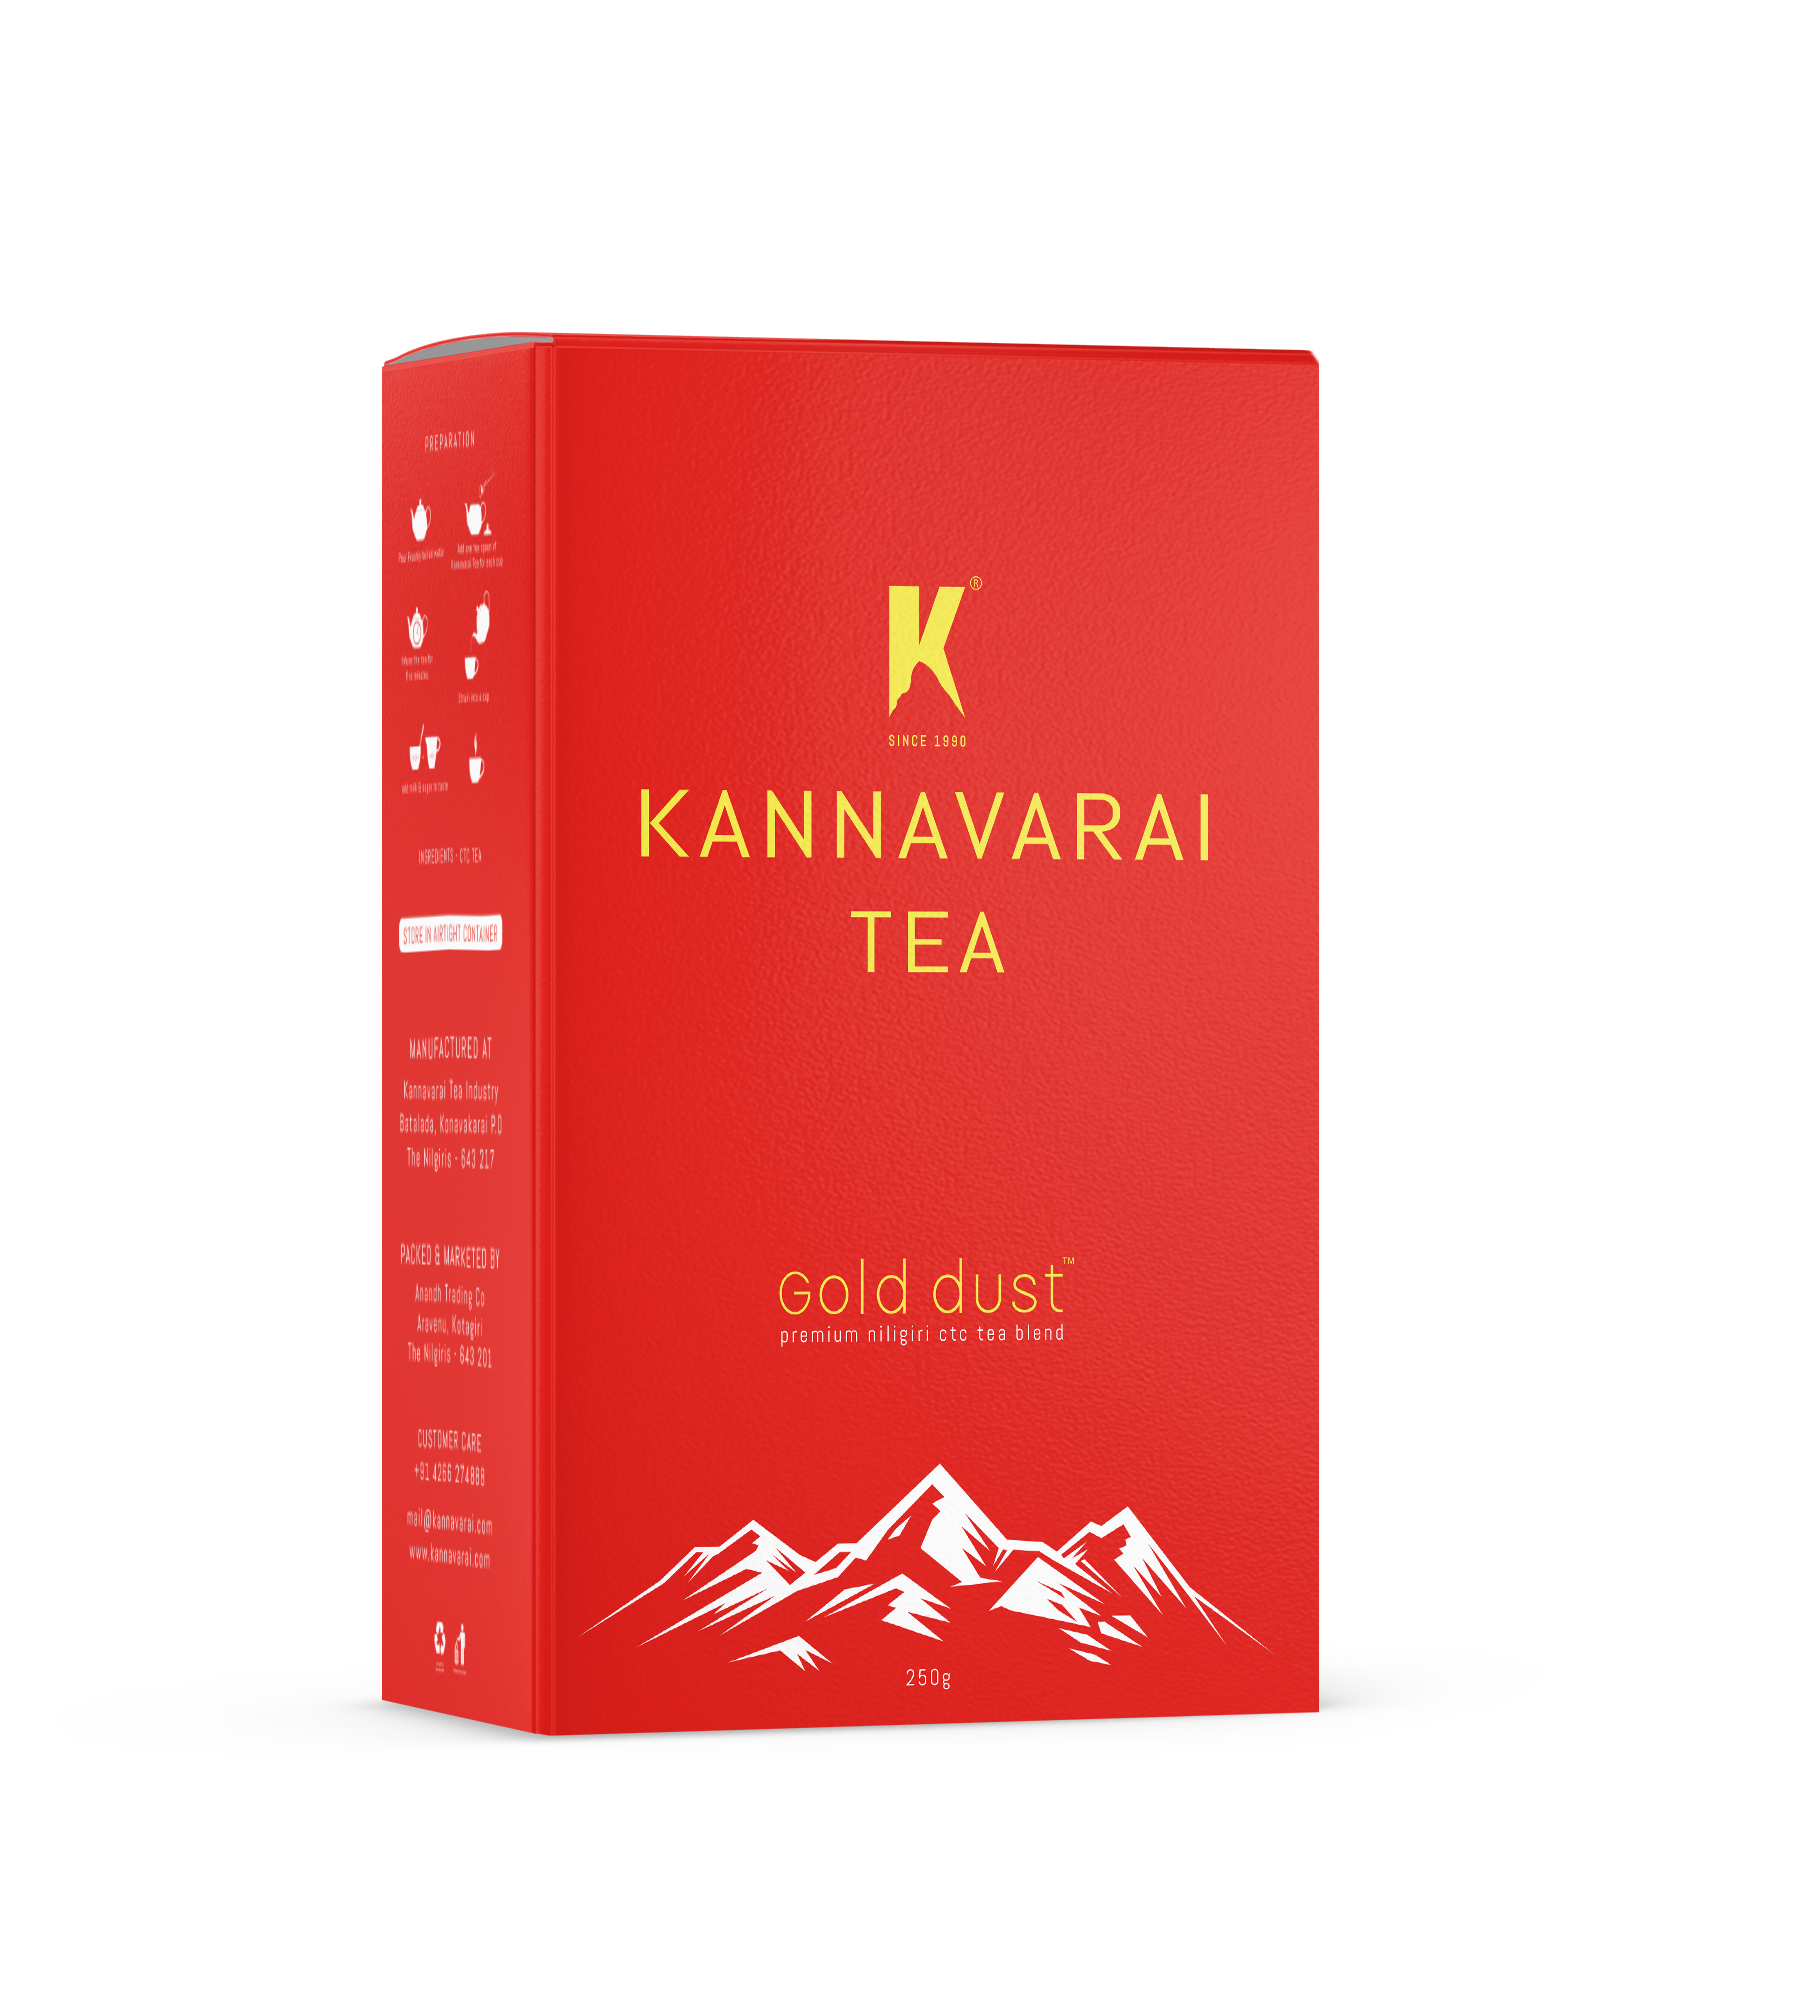 250 Gram of Kannvarai's Gold dust category in a red color rectangular package